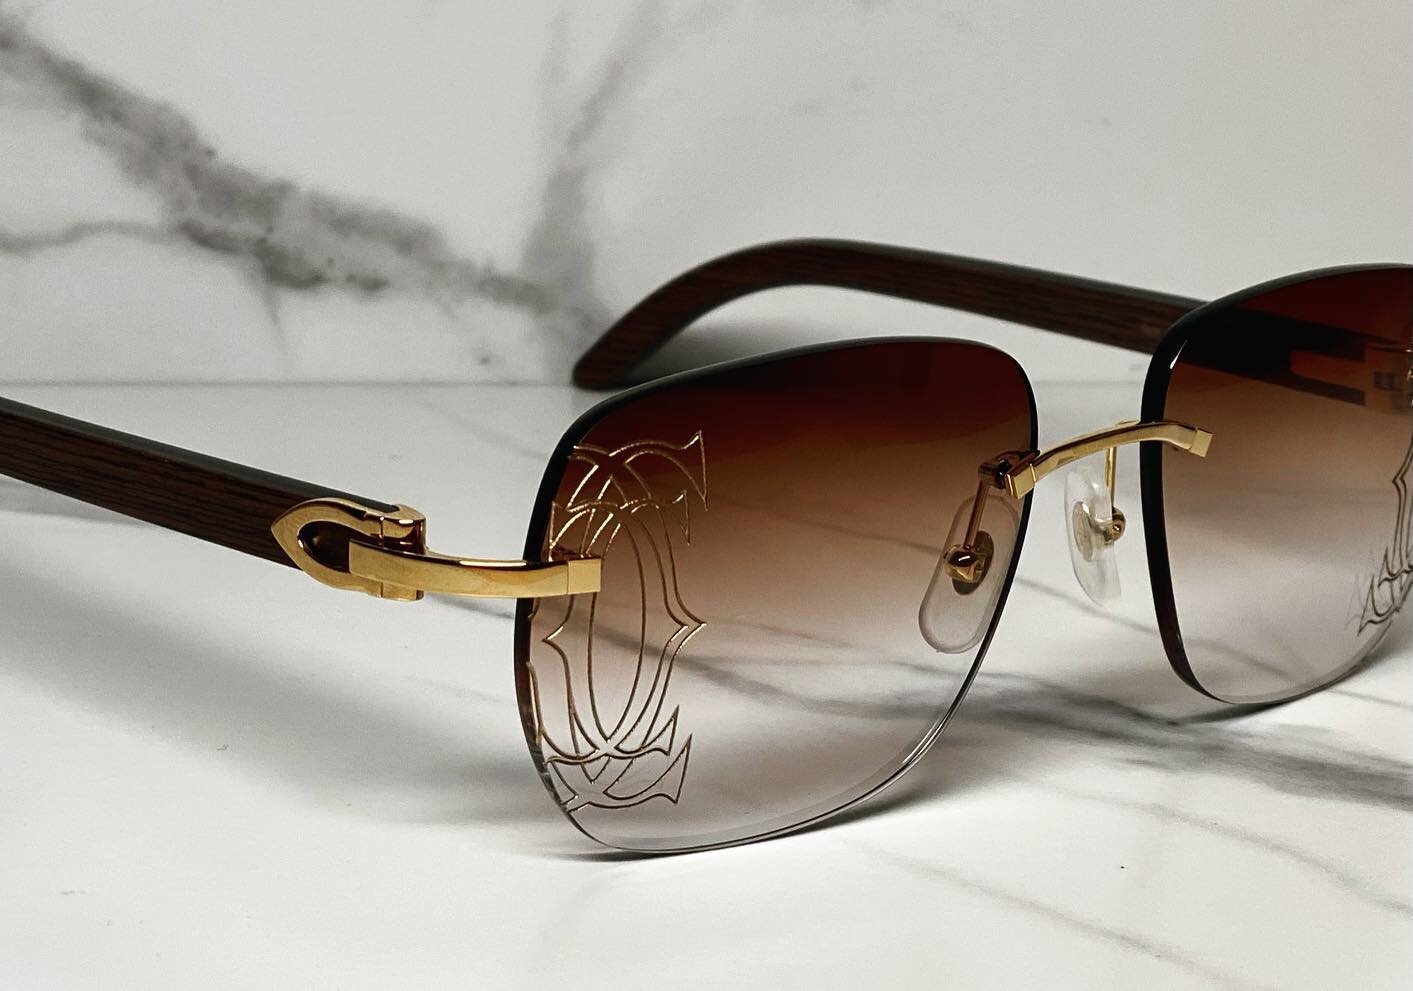 Speaking of custom engravings 👀. This C-Decor Emblem is back in stock for the summer! 

Available Now | DM for more info

#cartier #cartiereyewear #cartierglasses #cartiersunglasses #cartierrimless #customcartier #detroit #313 #opticalshop #luxuryey